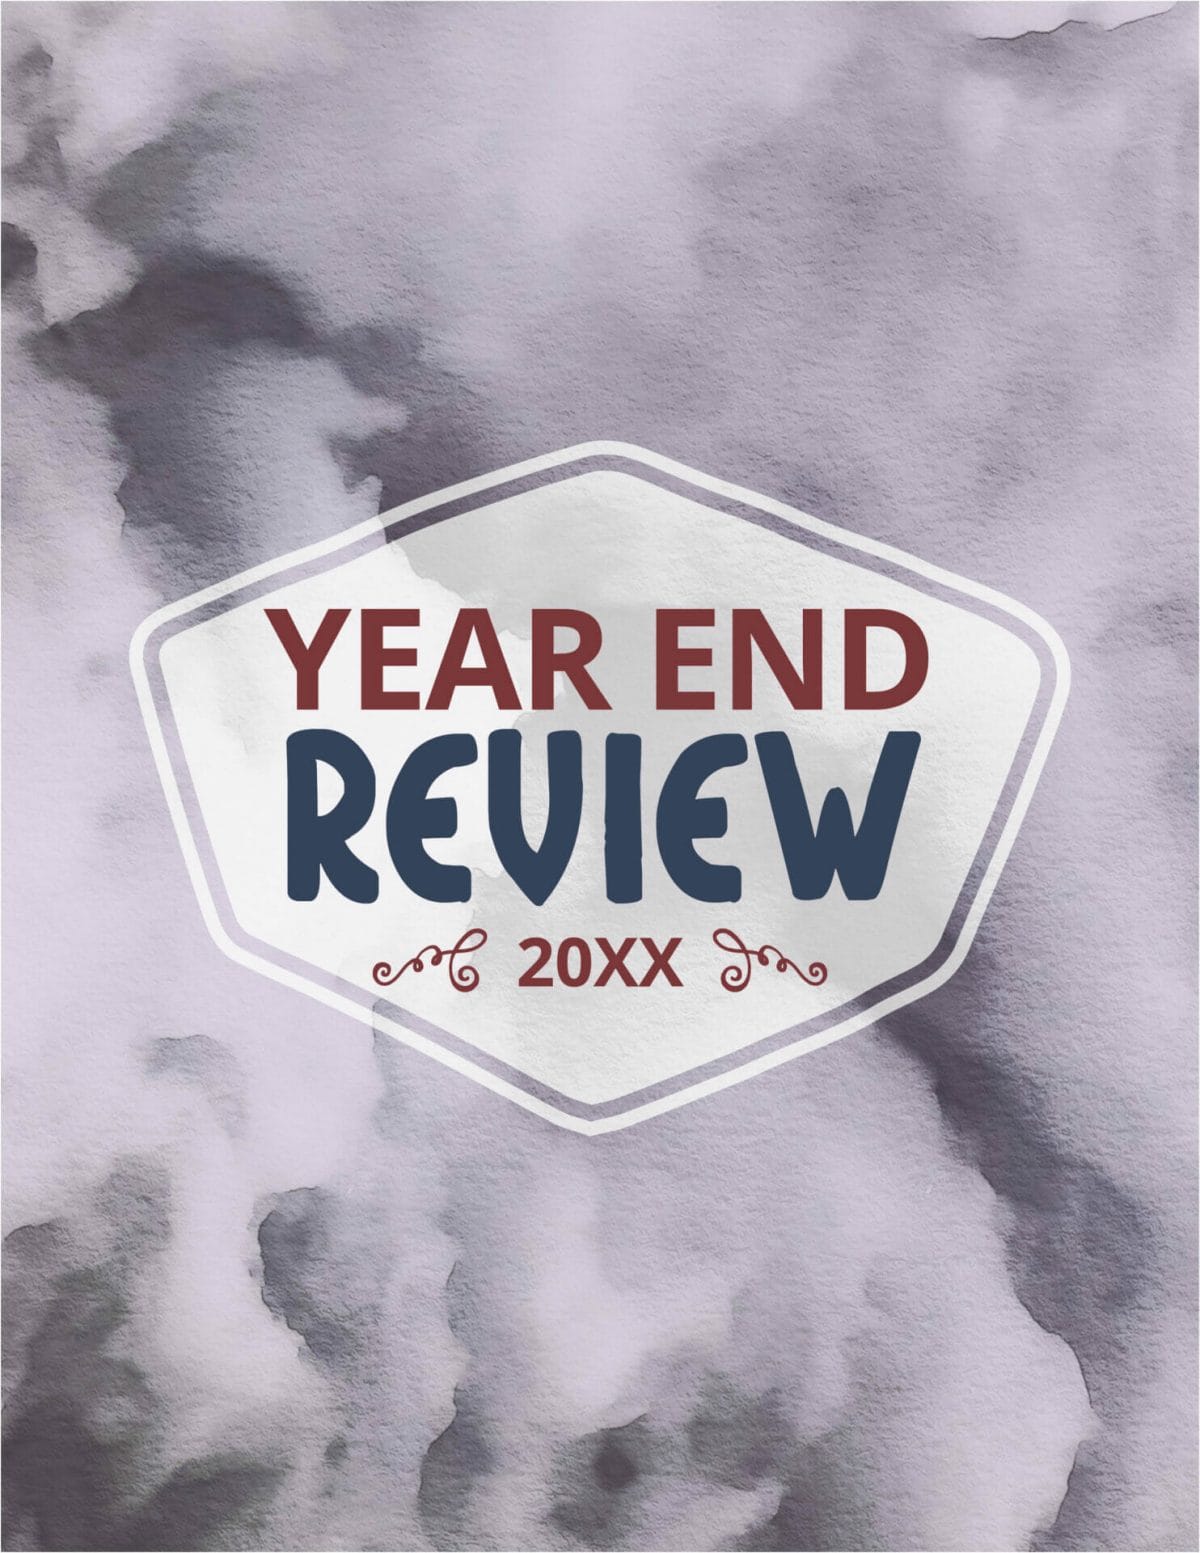 01 Year end review cover